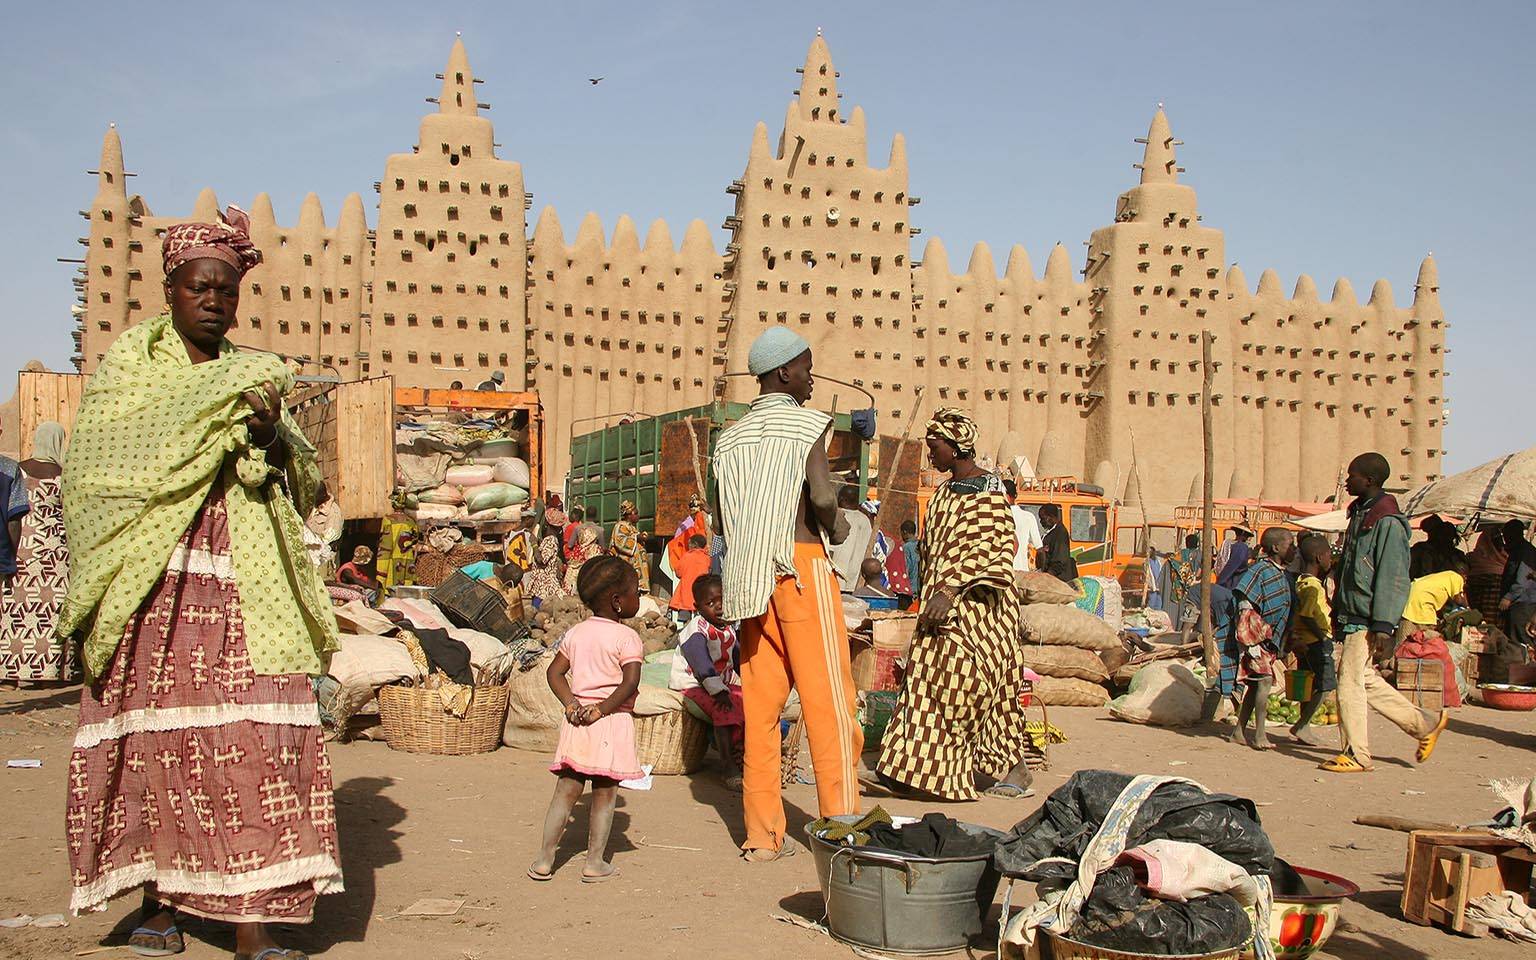 Mosque in Djenne with families in a market place in the foreground